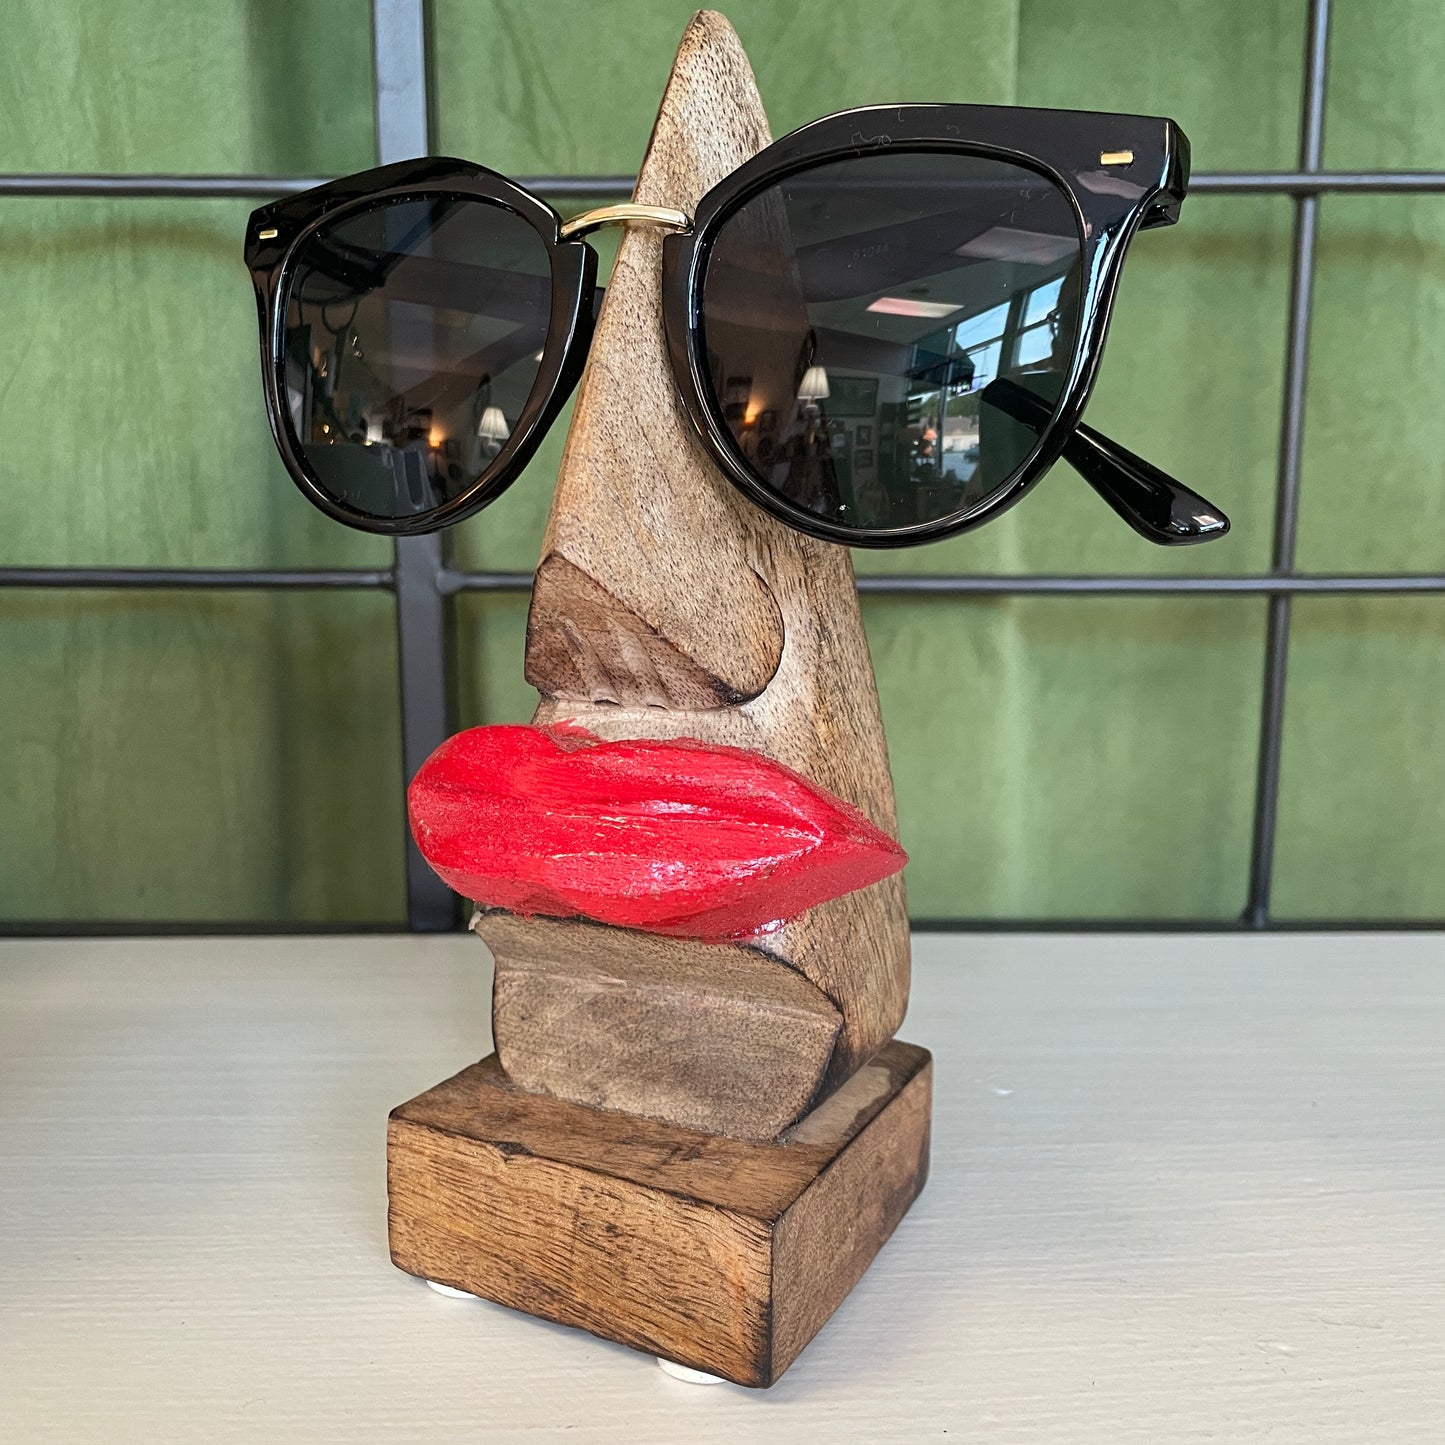 wooden eyeglass display replicating a face when glasses are worn